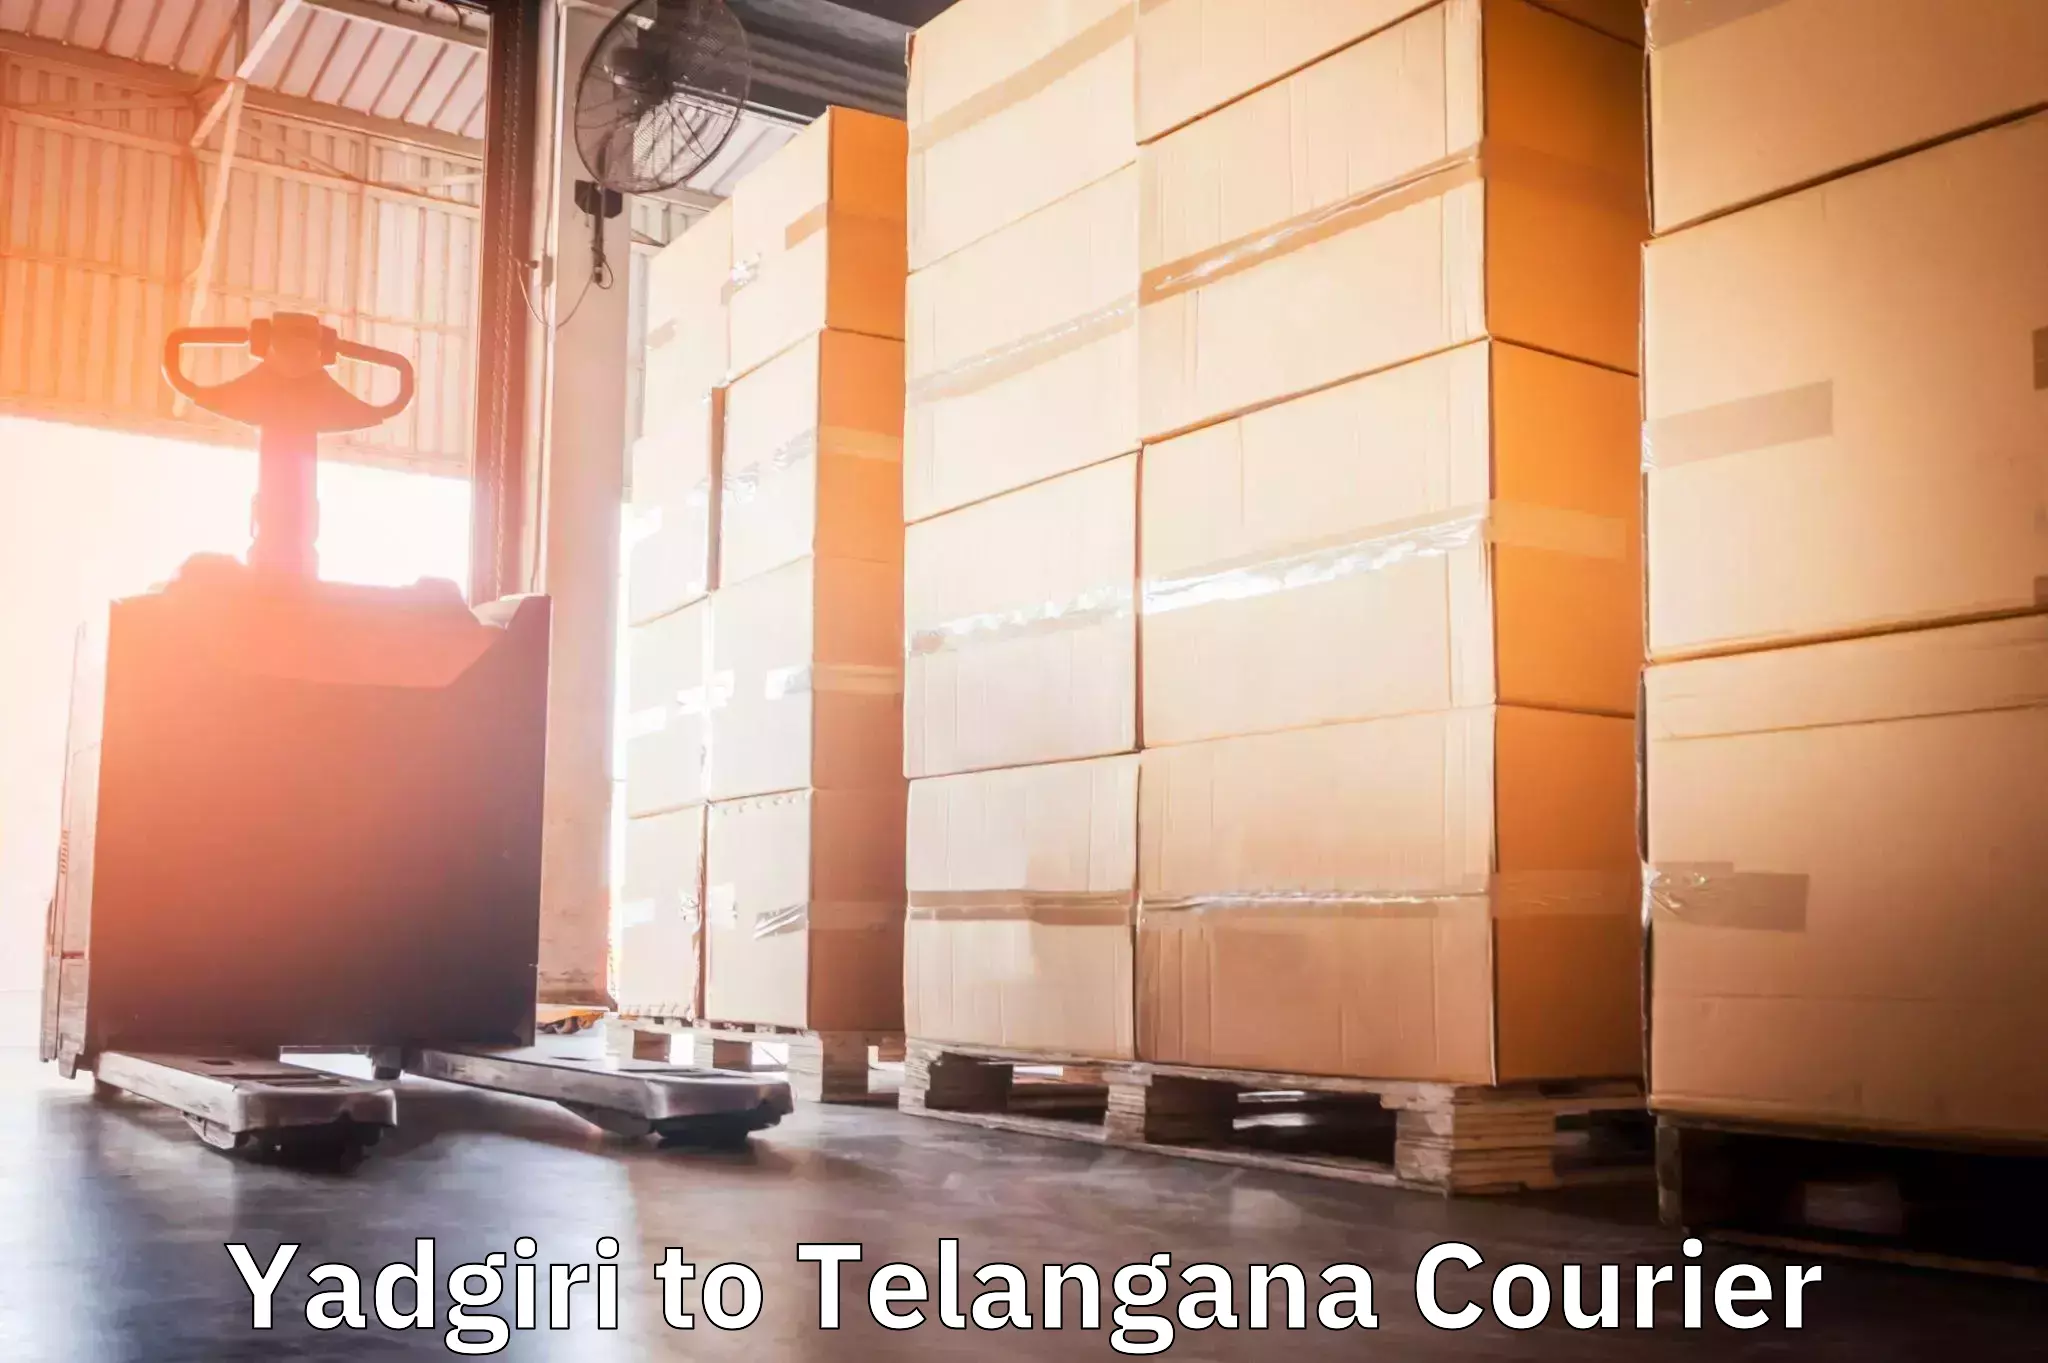 Multi-national courier services Yadgiri to Telangana